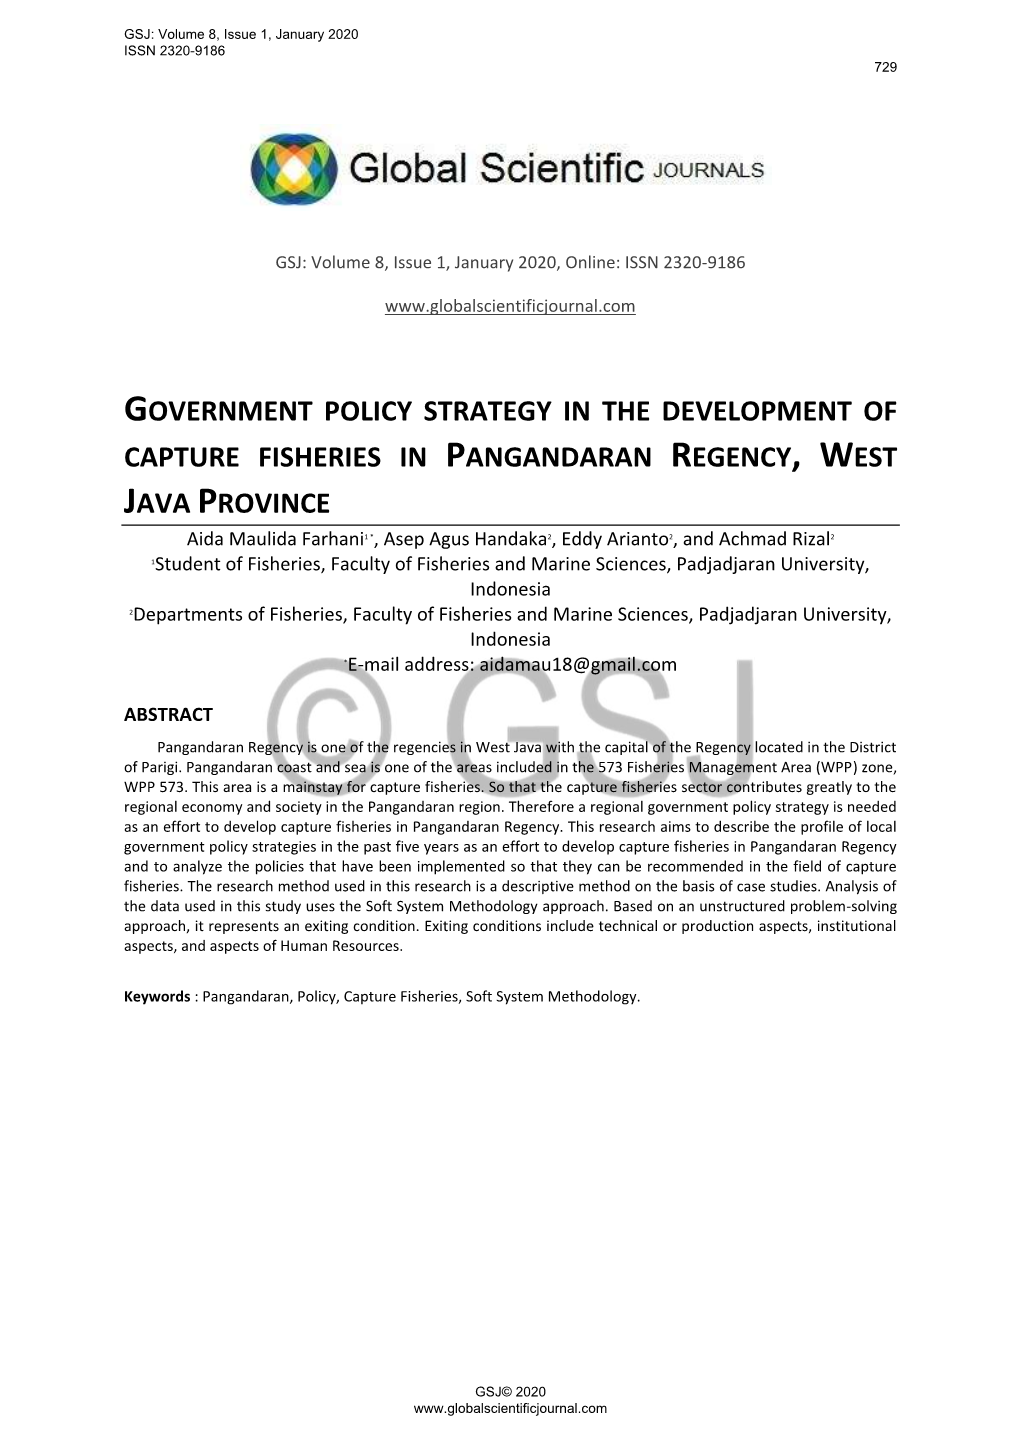 Government Policy Strategy in the Development of Capture Fisheries in Pangandaran Regency, West Java Province